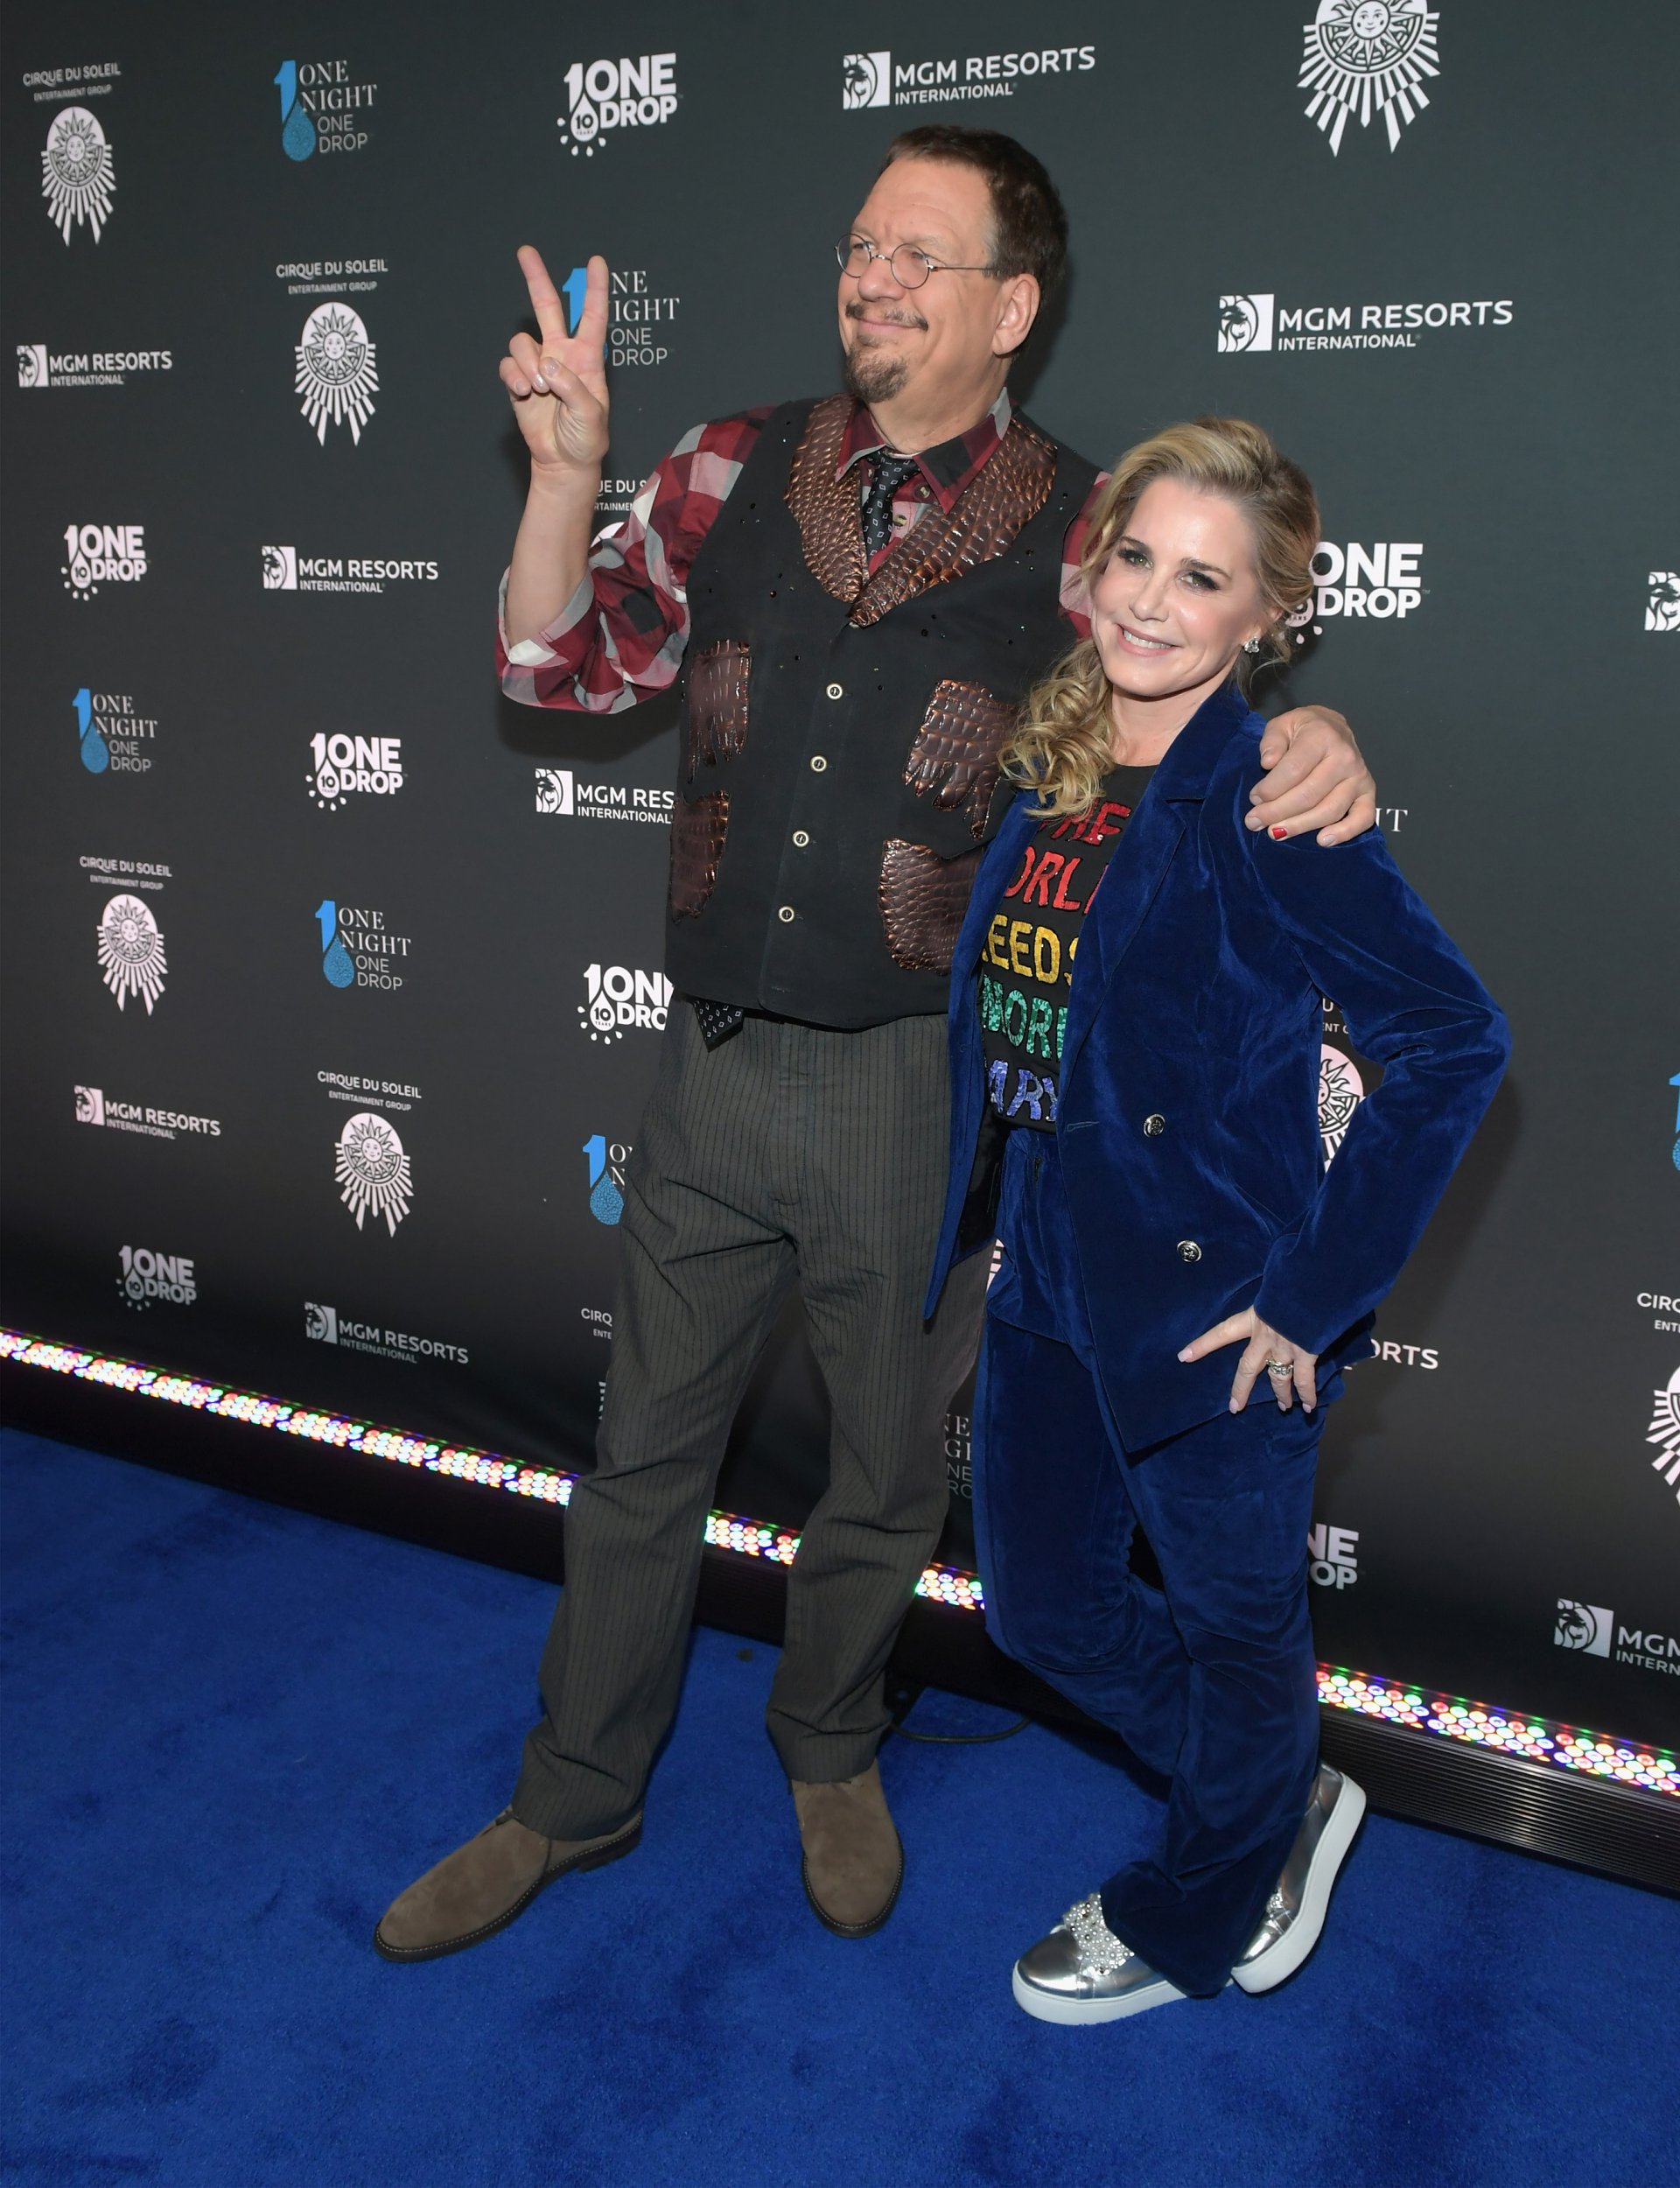 Penn Jillette and Emily Zolten at Mandalay Bay Resort and Casino on March 2, 2018, in Las Vegas, Nevada